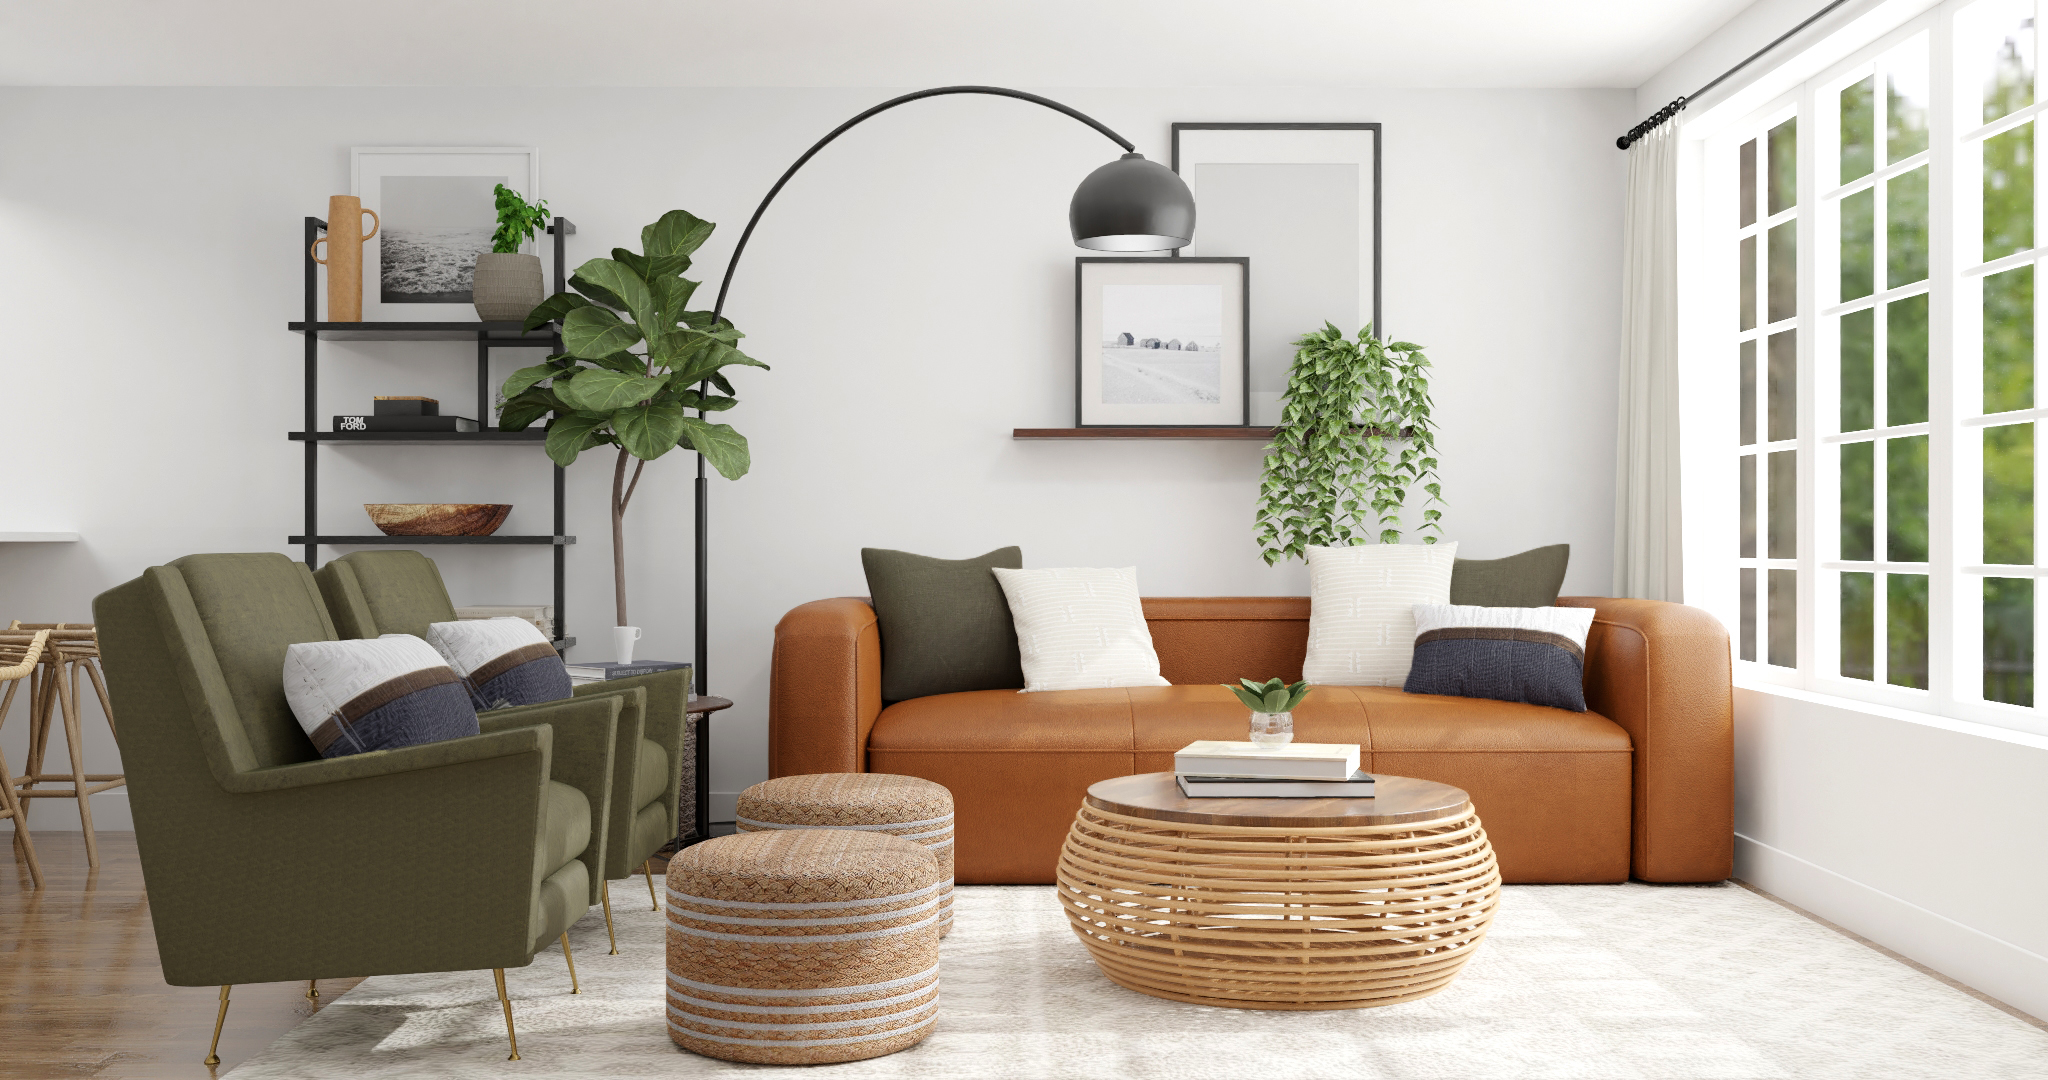 Learn How To Decorate A Living Room In 6 Easy Steps | Spacejoy